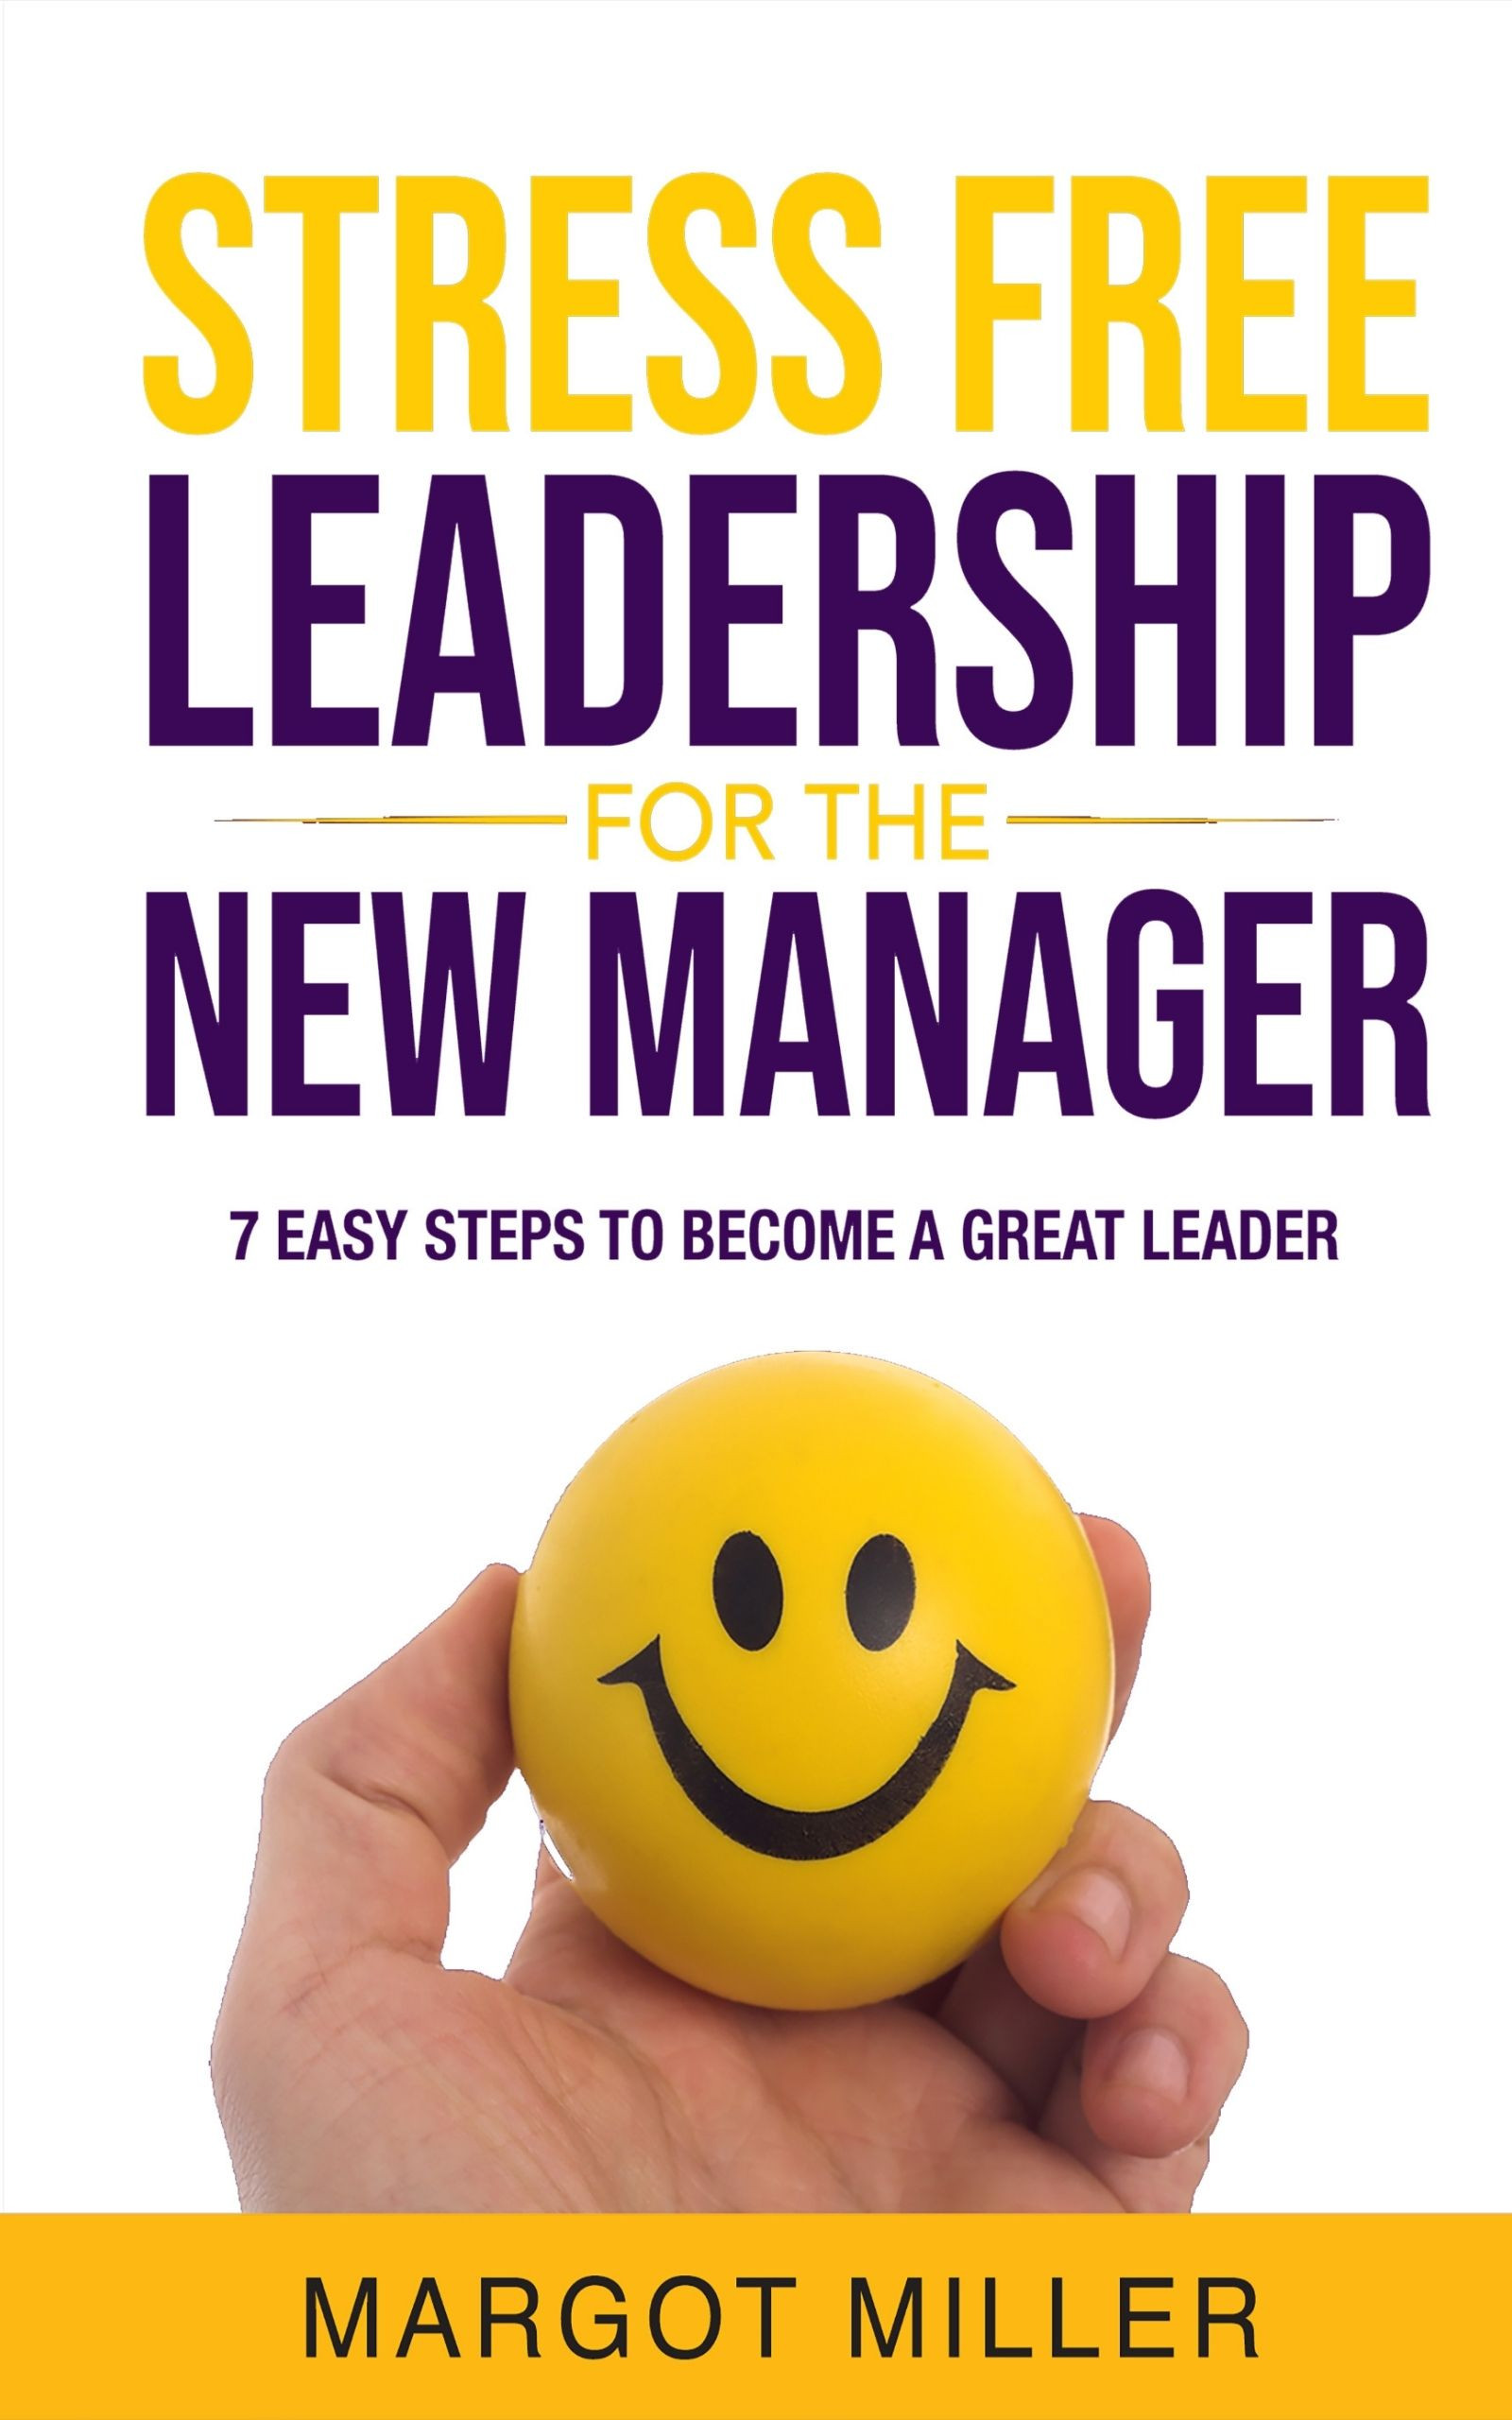 Stress Free Leadership for the New Manager – 7 Easy Steps to Become a Great Leader